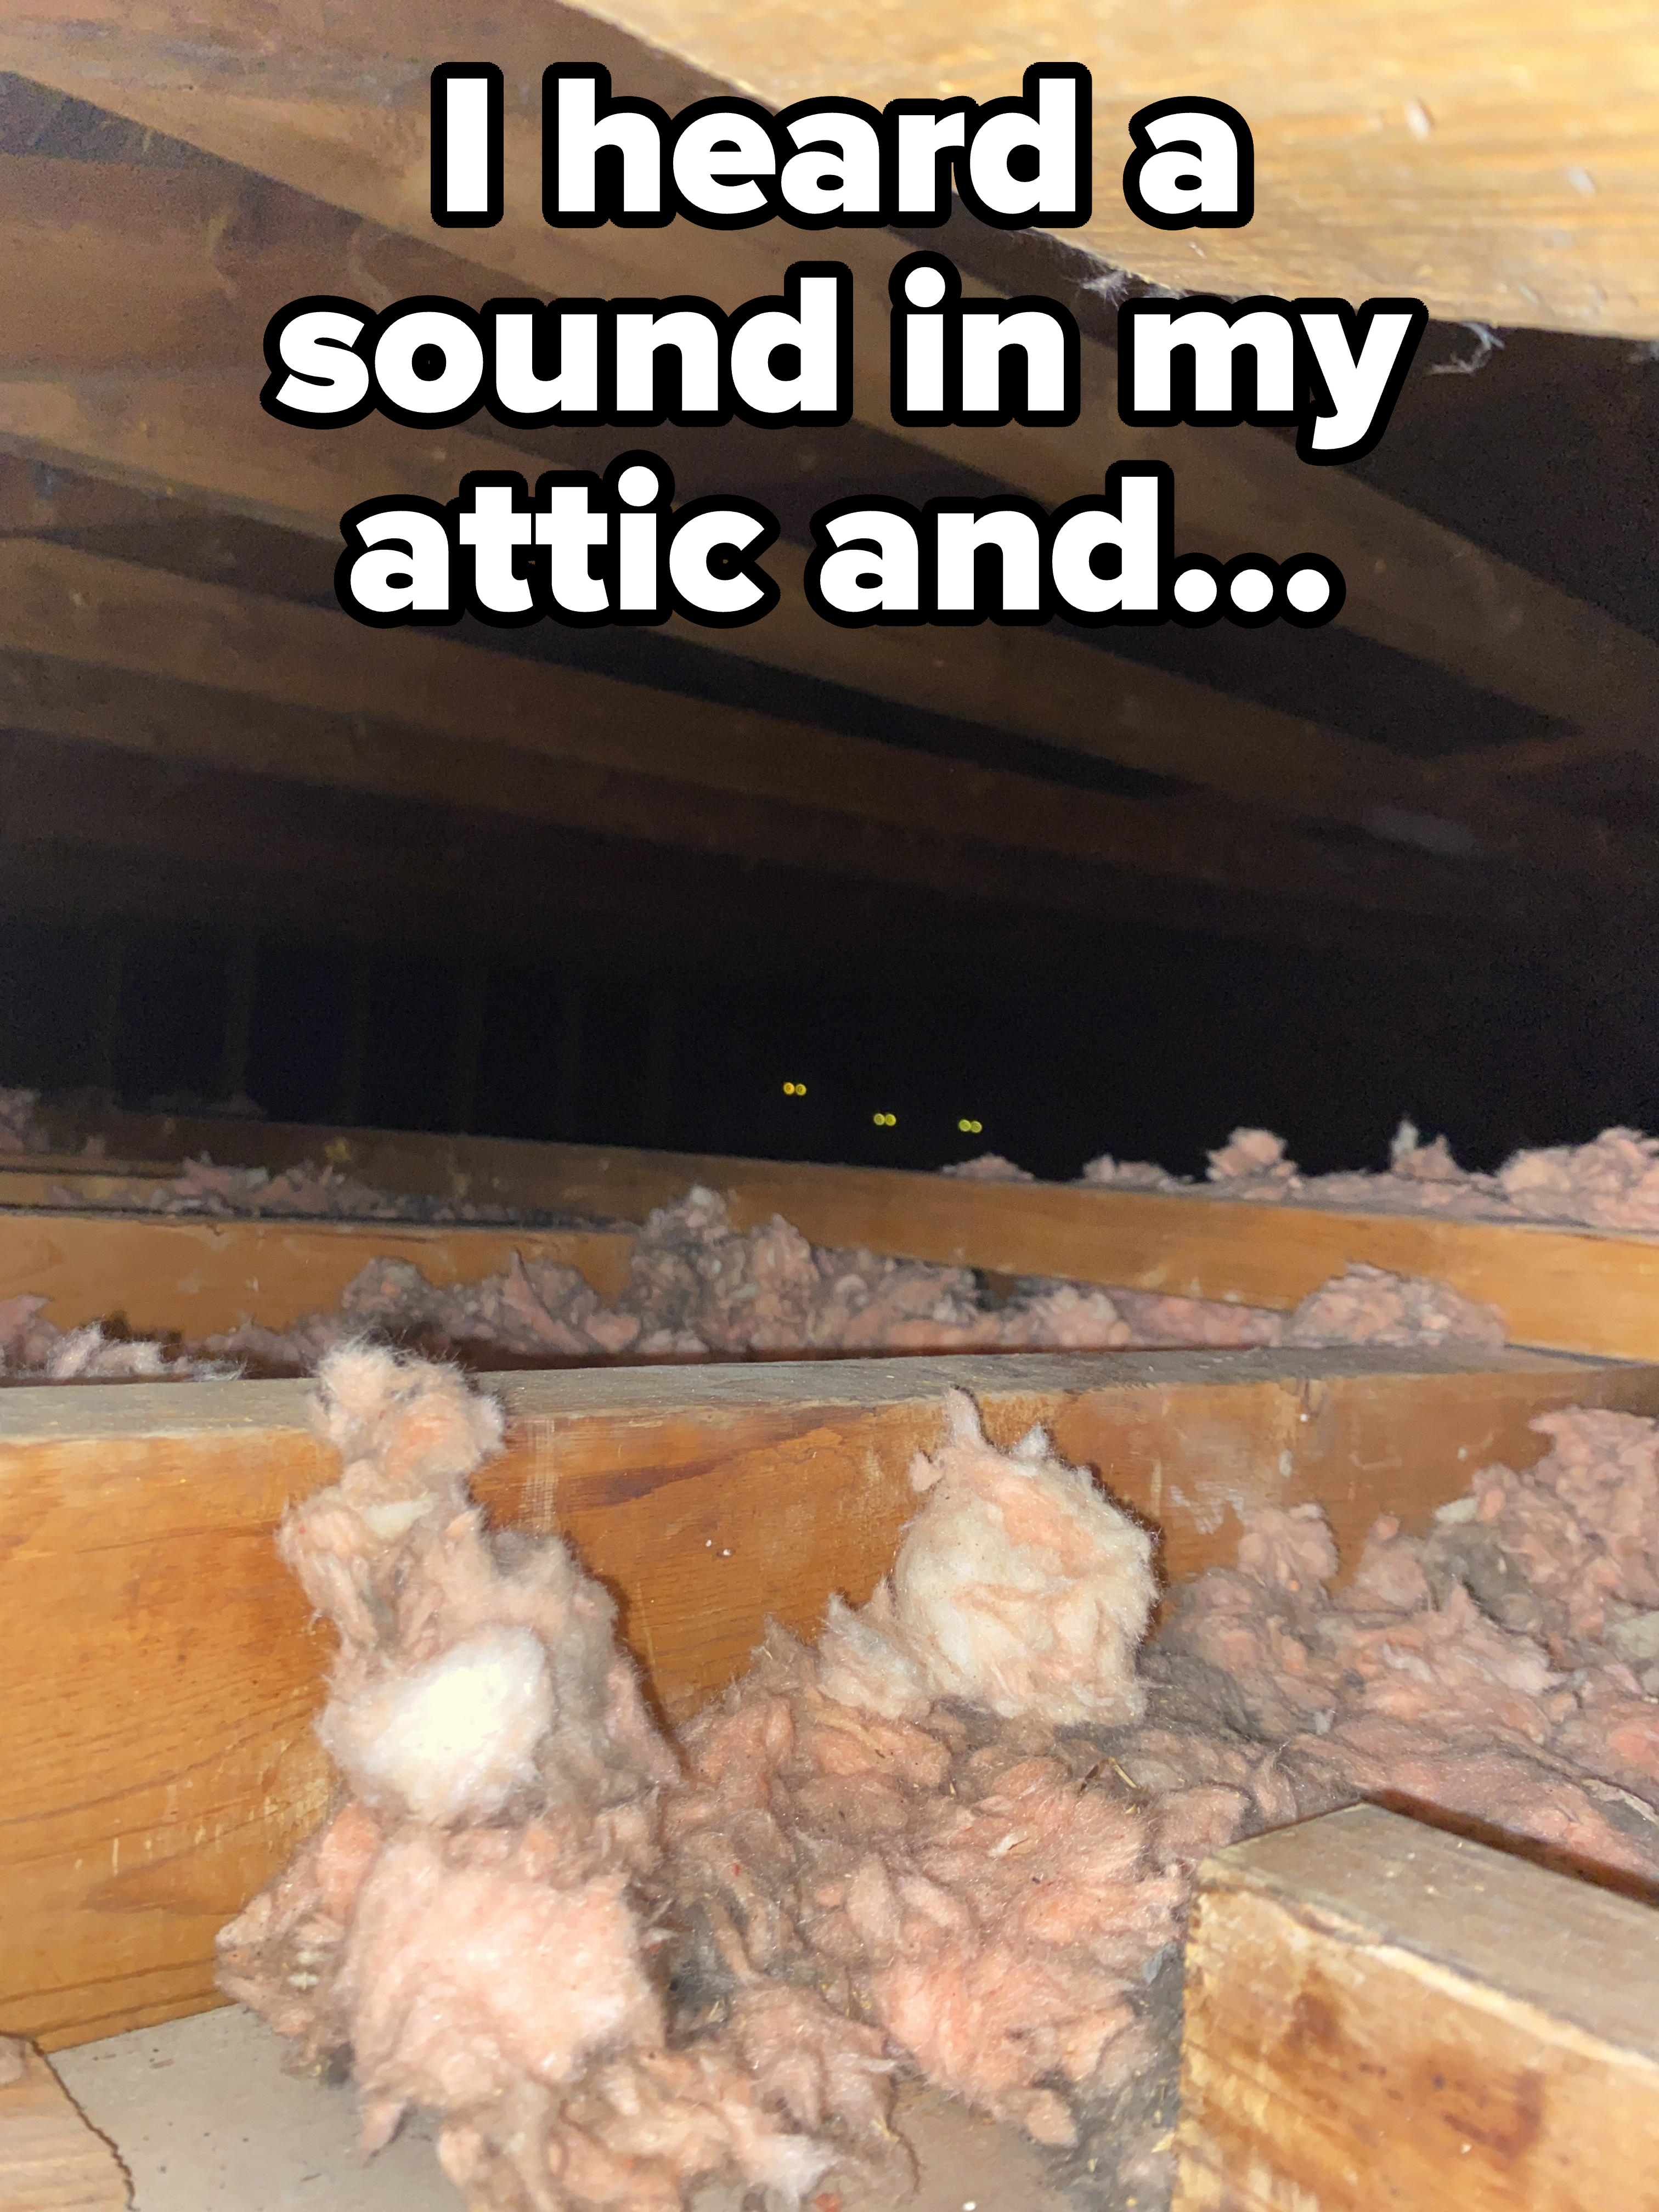 Three pairs of animal eyes peering from the shadows between attic beams among insulation